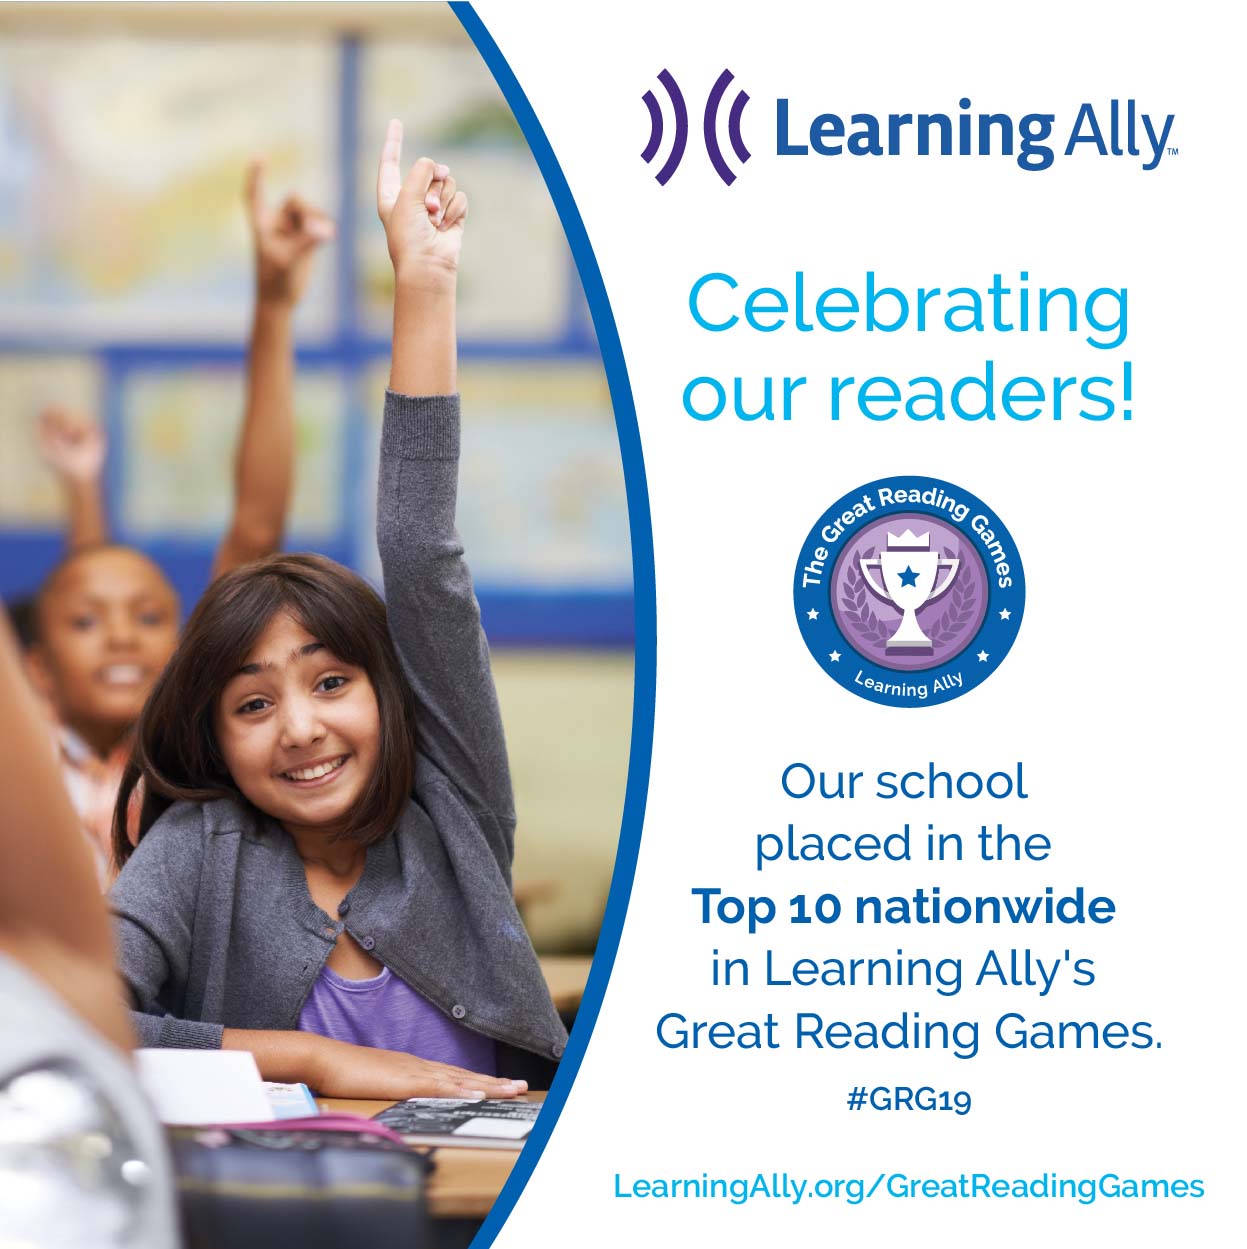 Learning Ally's Great Reading Games Image with text Celebrate Our Readers and the image of a trophy.